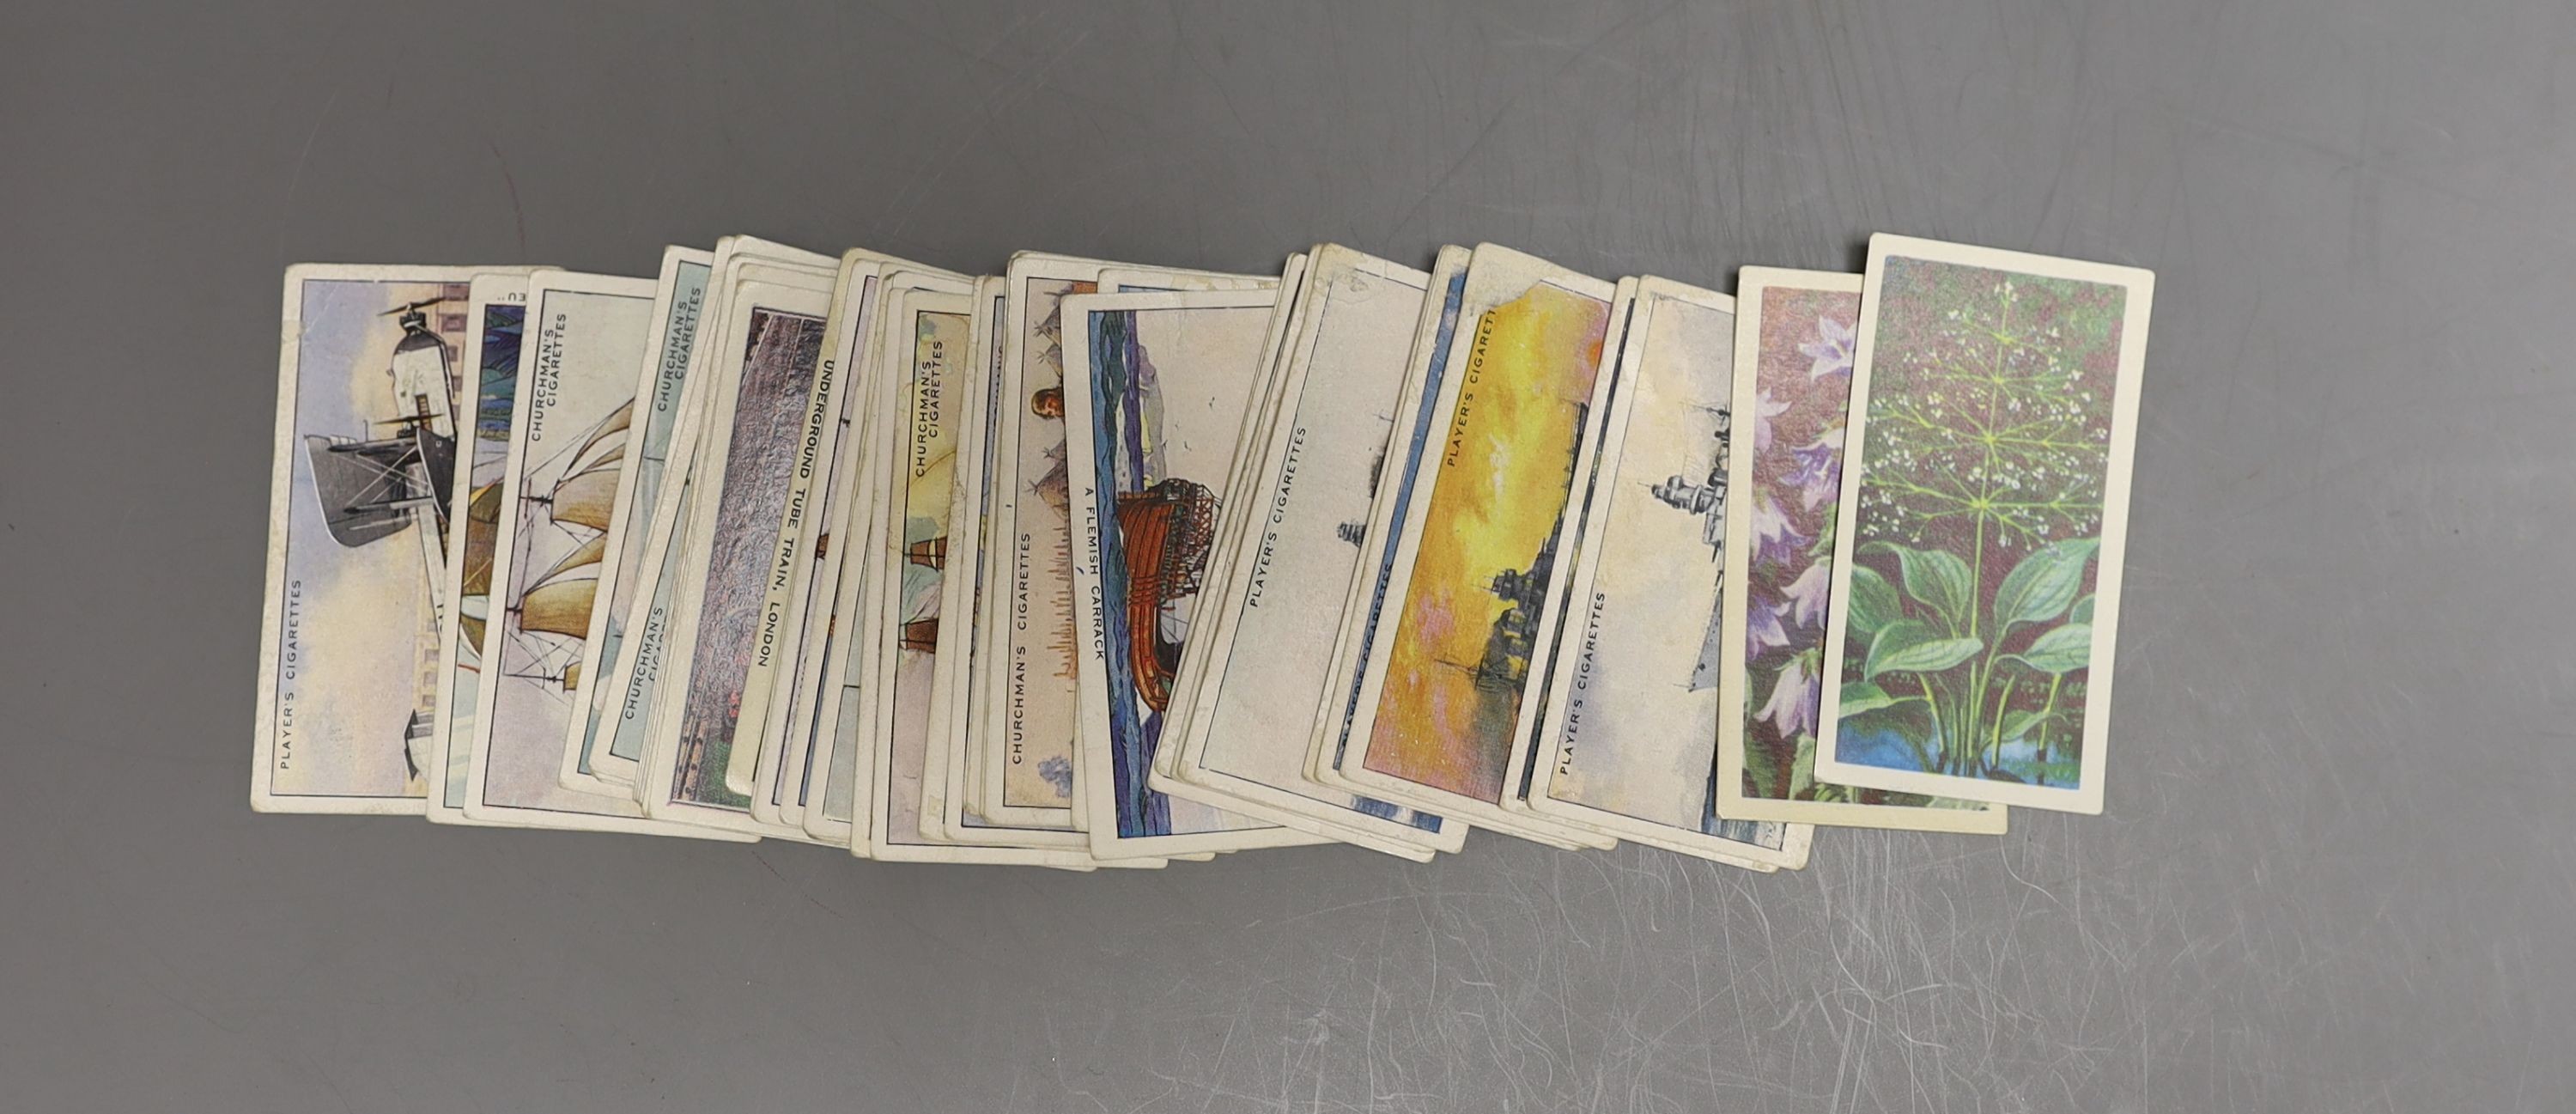 A collection of cigarette cards - Image 3 of 6